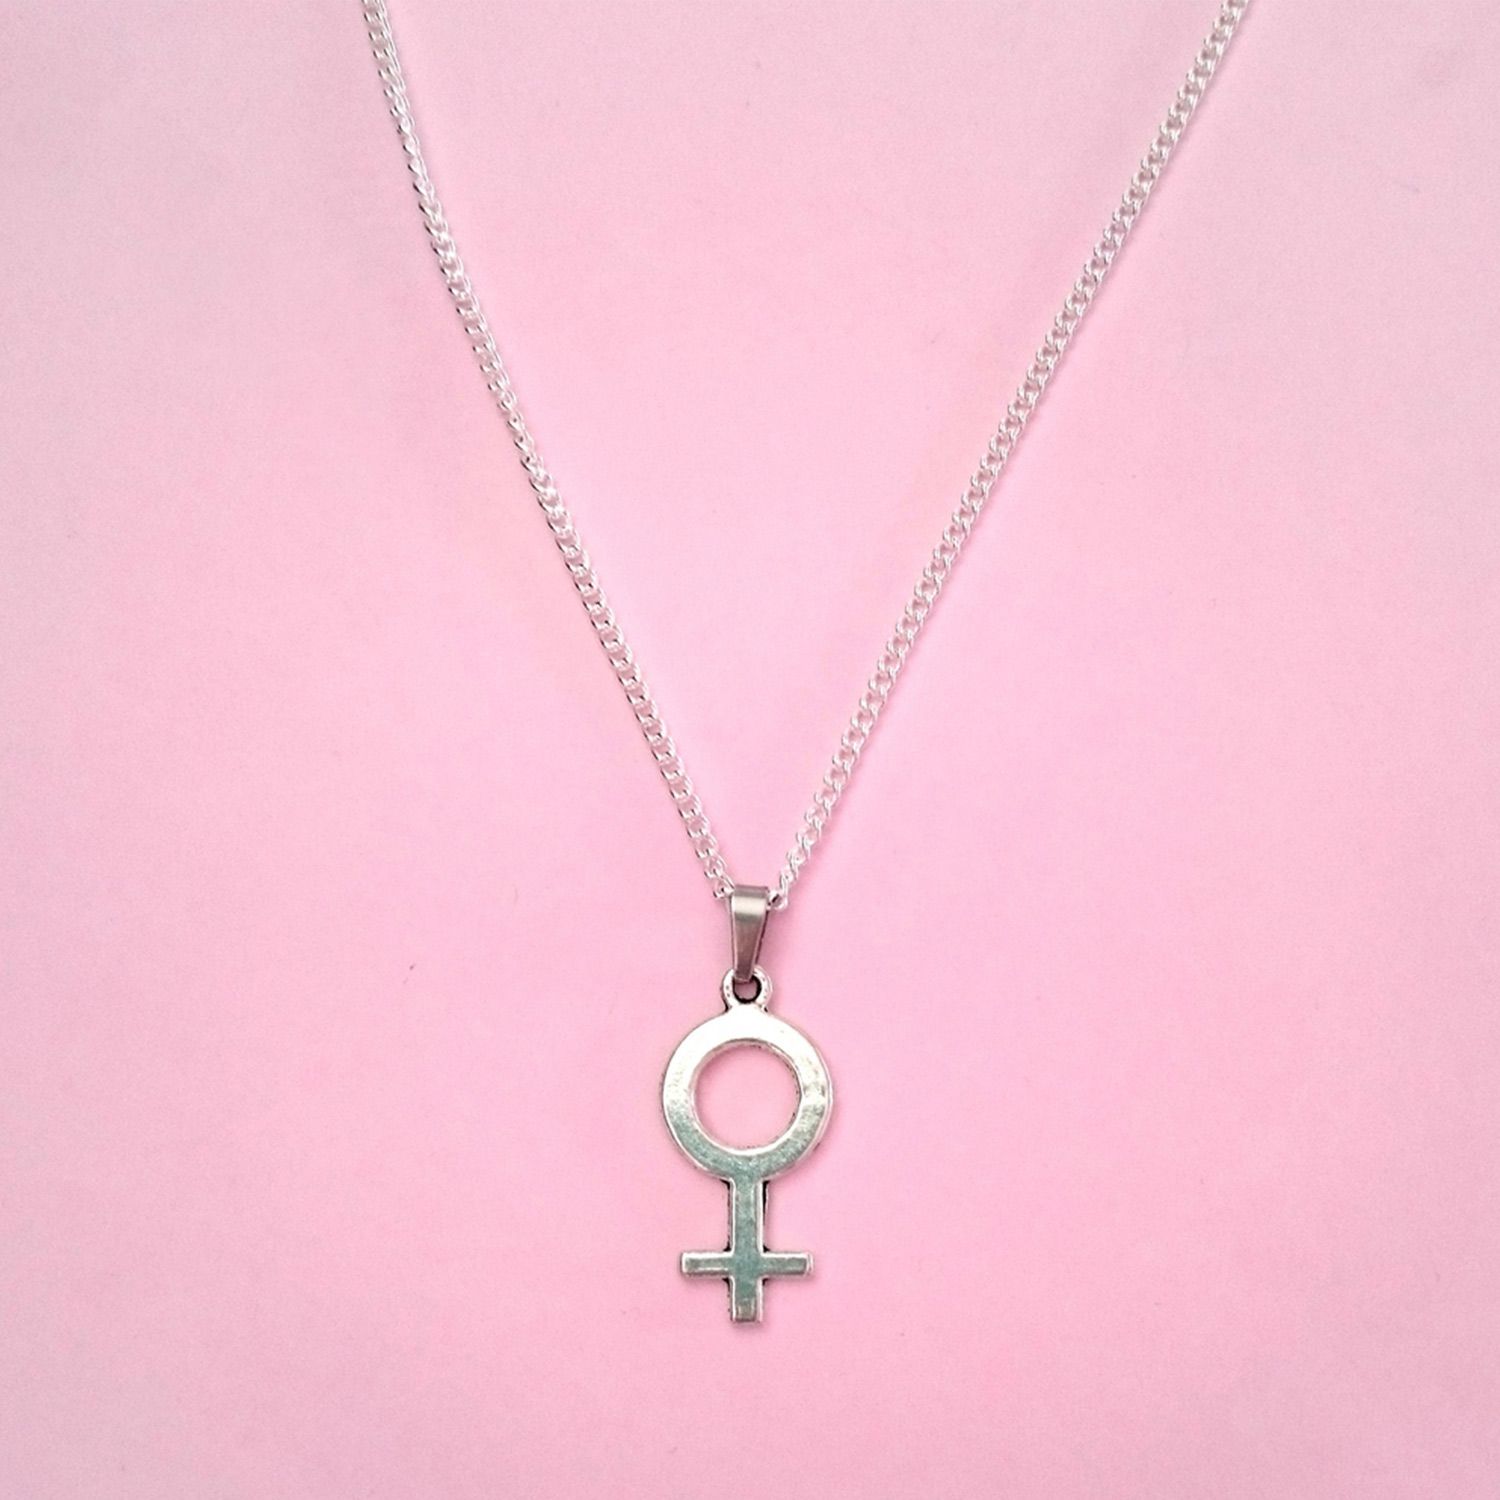 10 pieces of feminist jewelry for nasty women